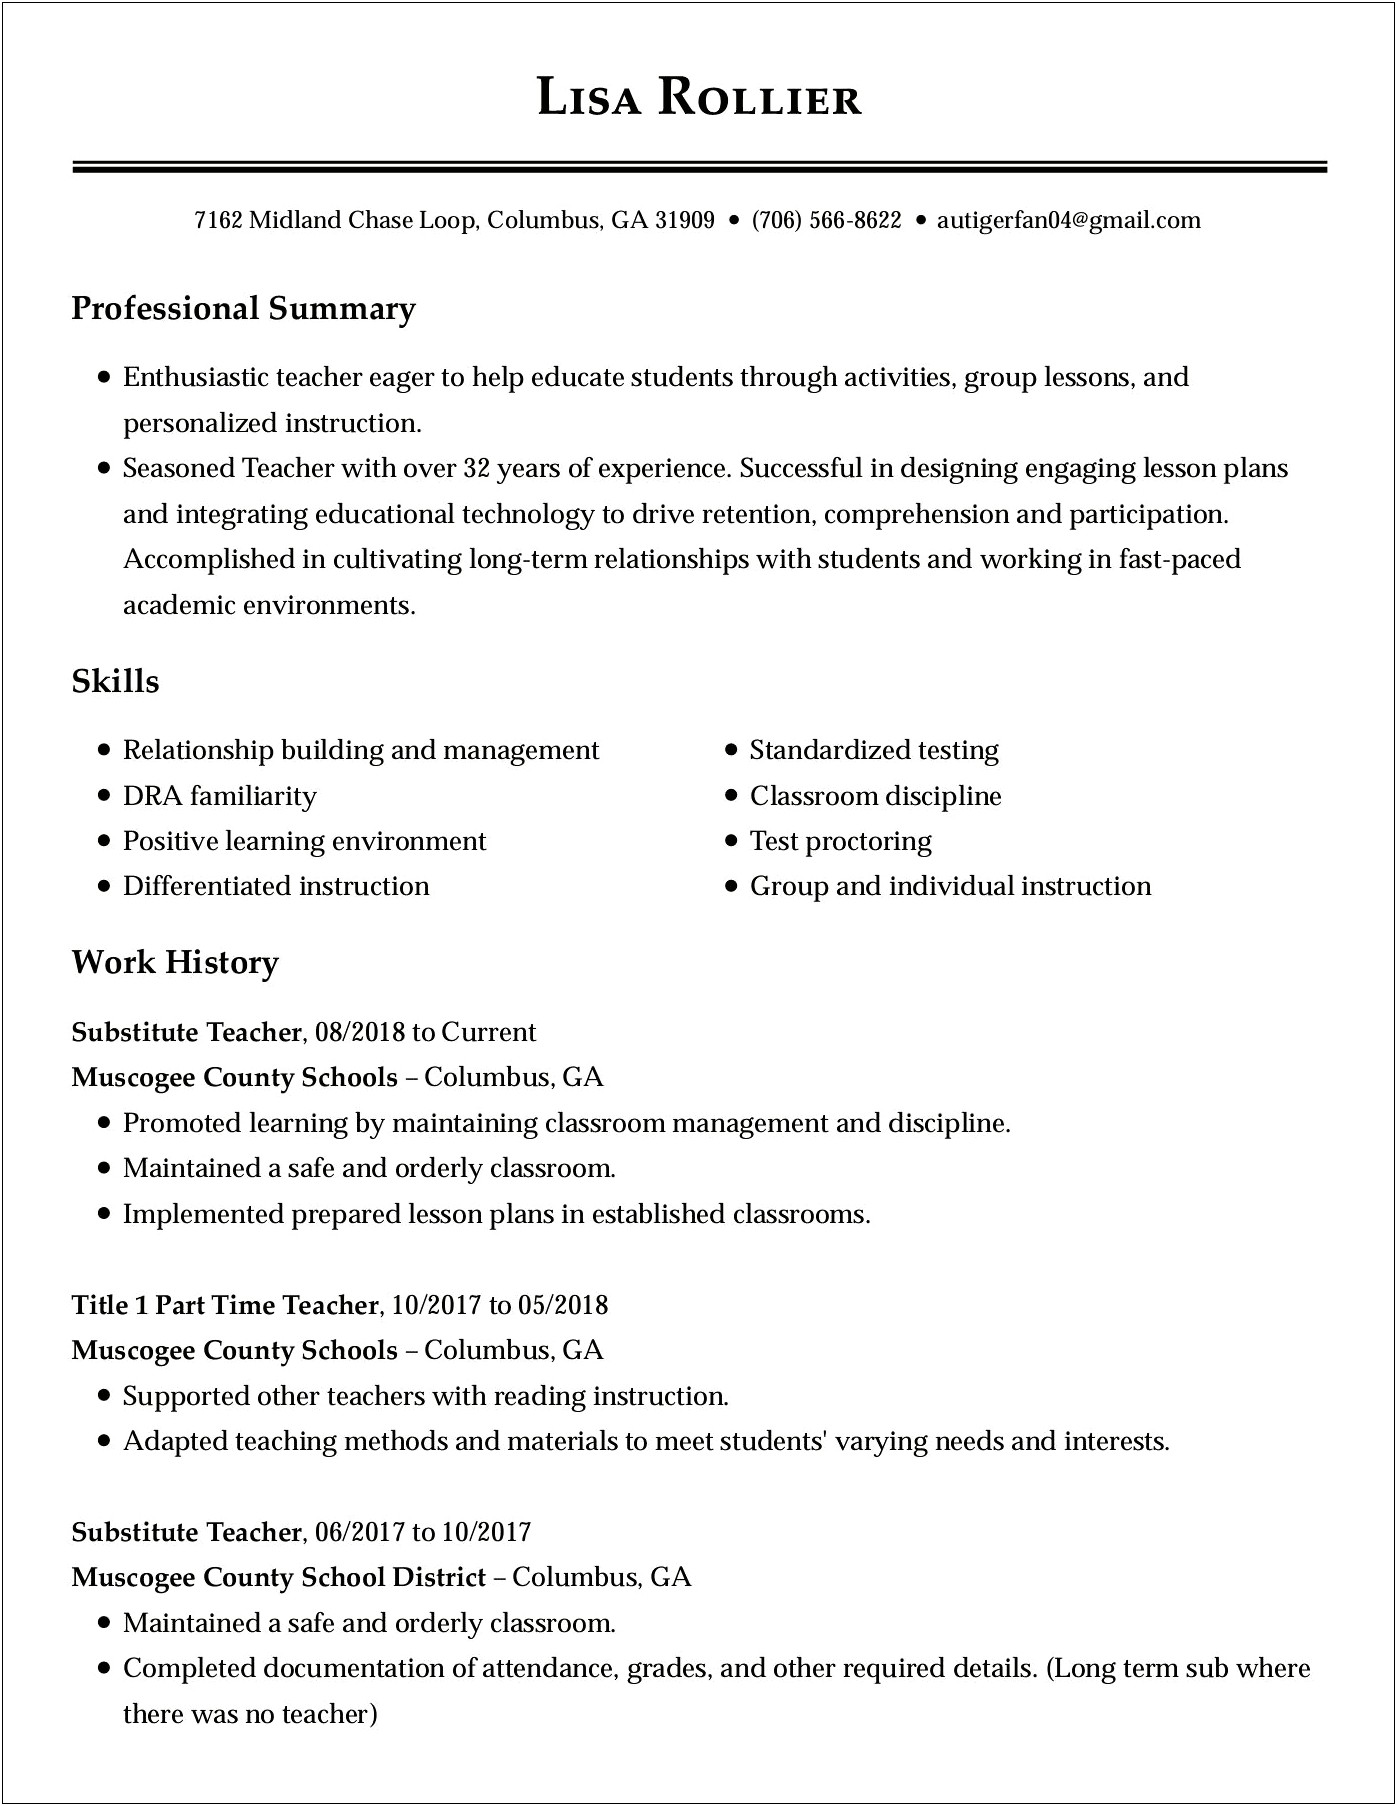 Substitute Teaching Classroom Management Experience On Resume